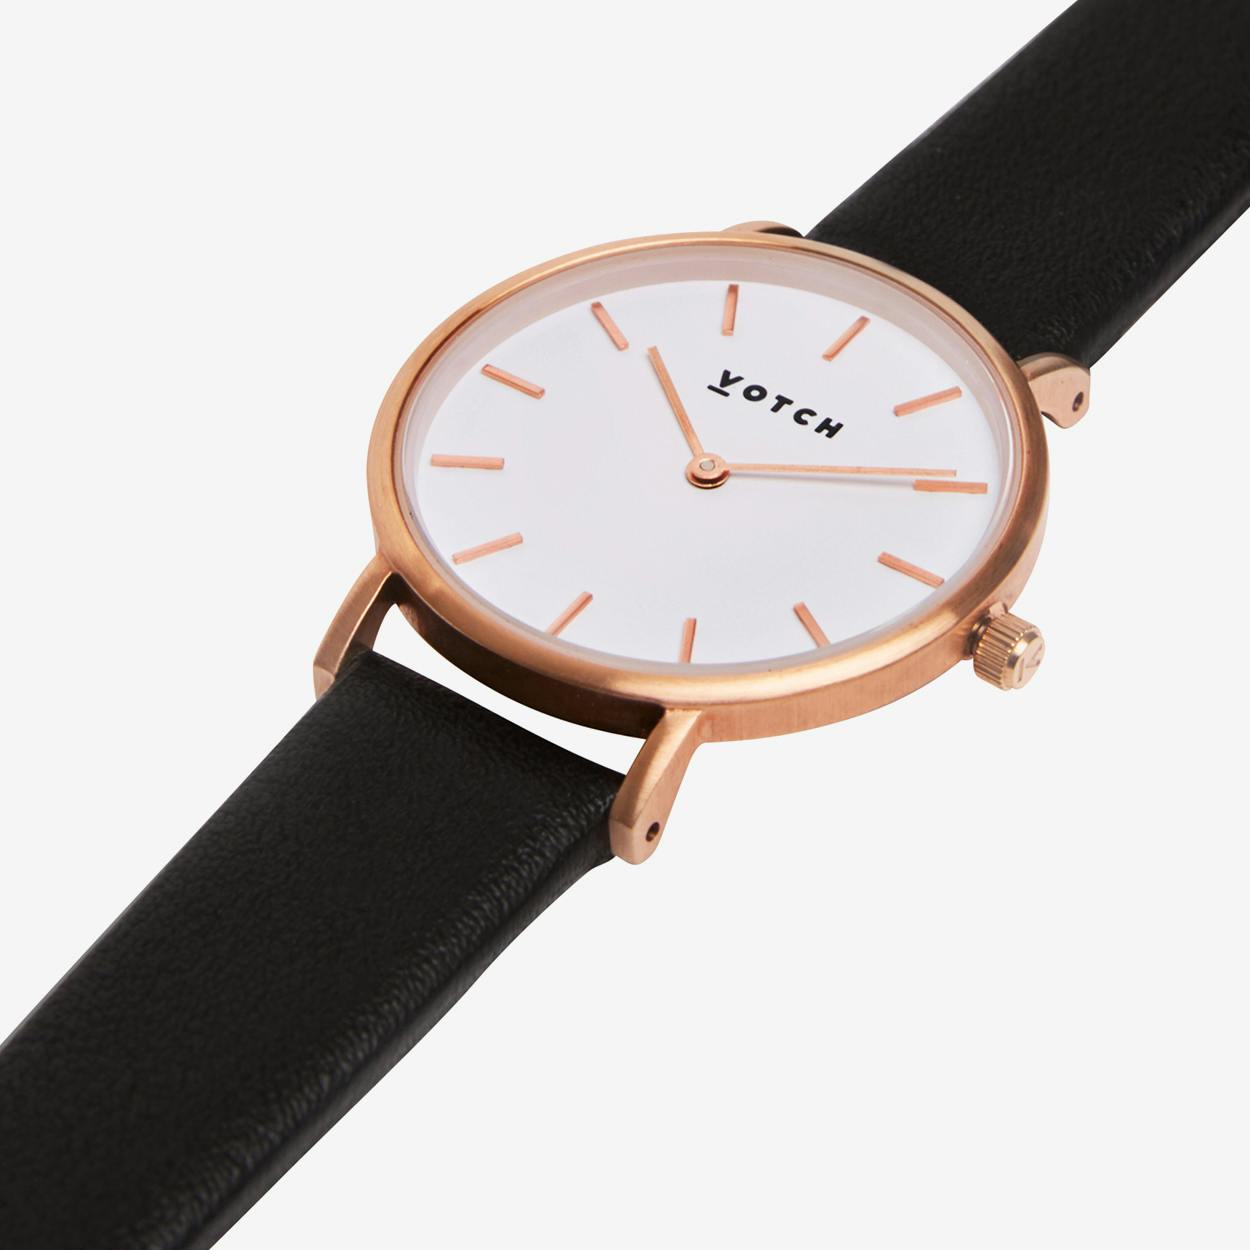 gold face watch with leather strap